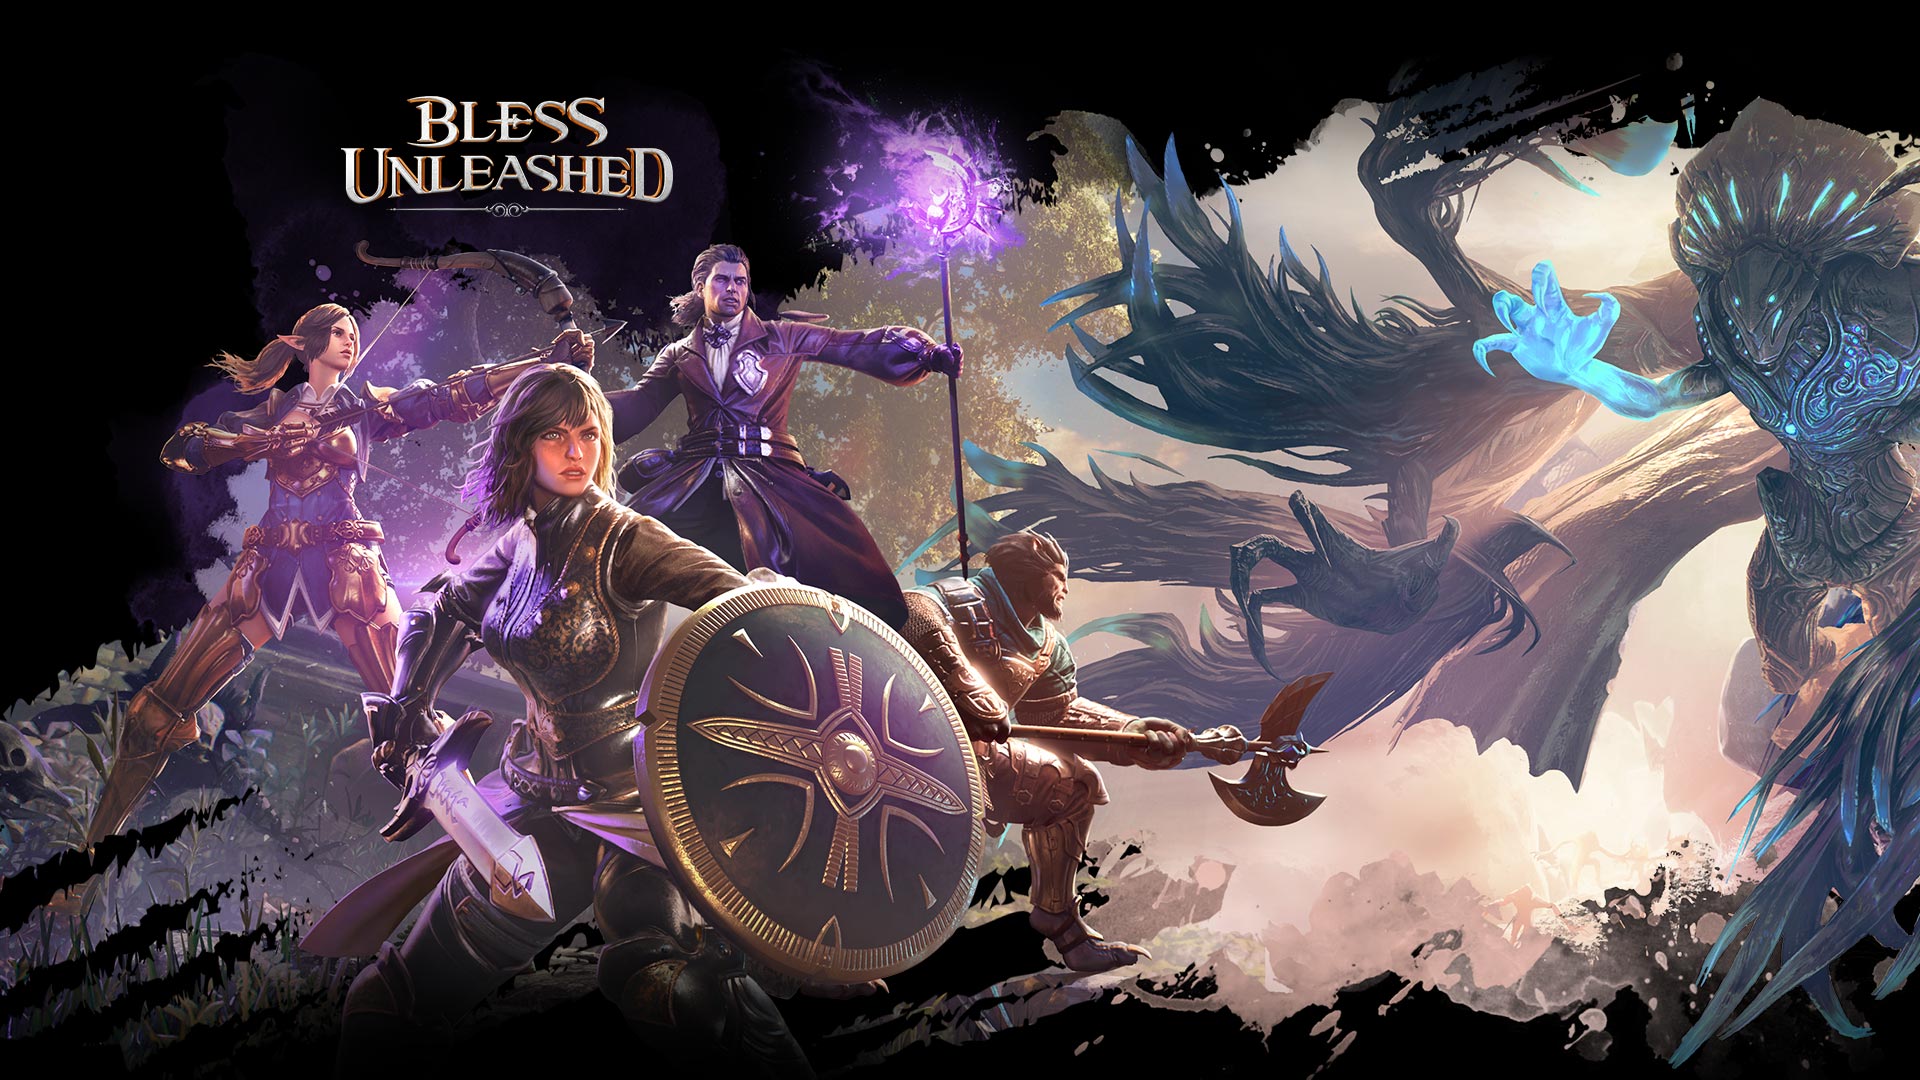 Bless Unleashed HD desktop wallpaper featuring dynamic character artwork with fantasy warriors and mystical creatures.